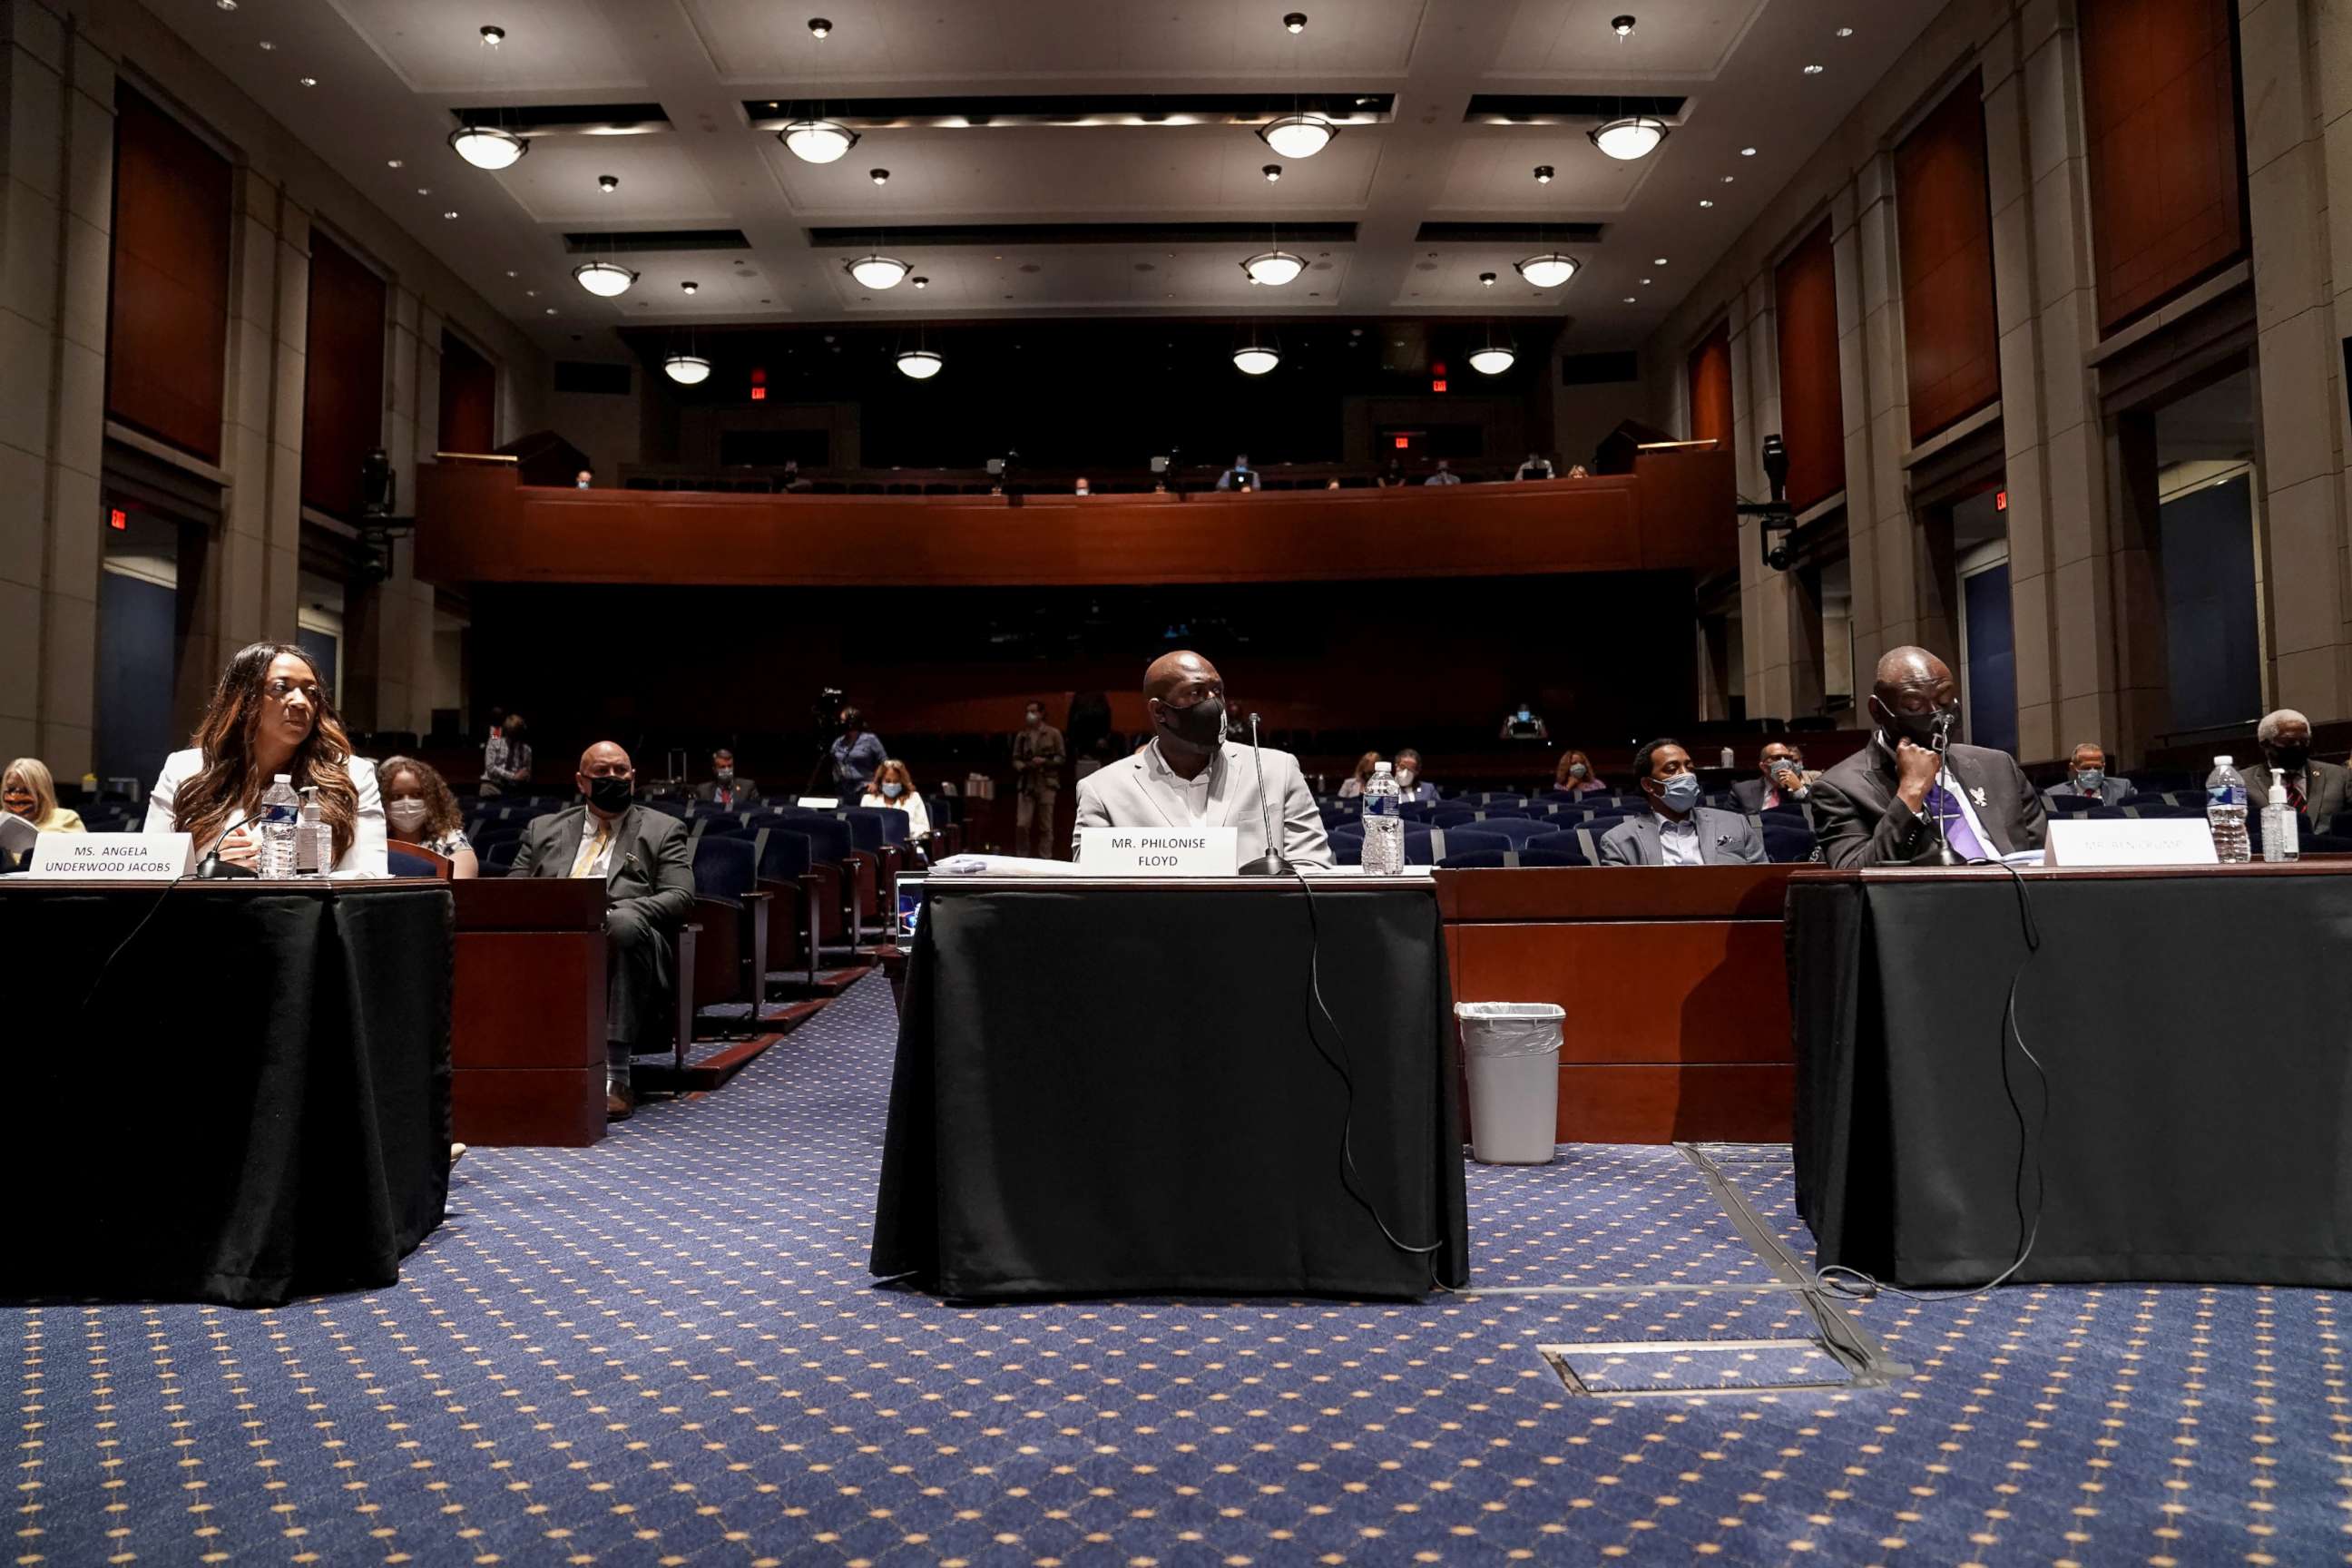 PHOTO: George Floyd's brother Philonise Floyd, civil rights attorney Benjamin Crump and Lancaster (California) City Council member Angela Underwood-Jacobs attend a House Judiciary Committee hearing in Washington.